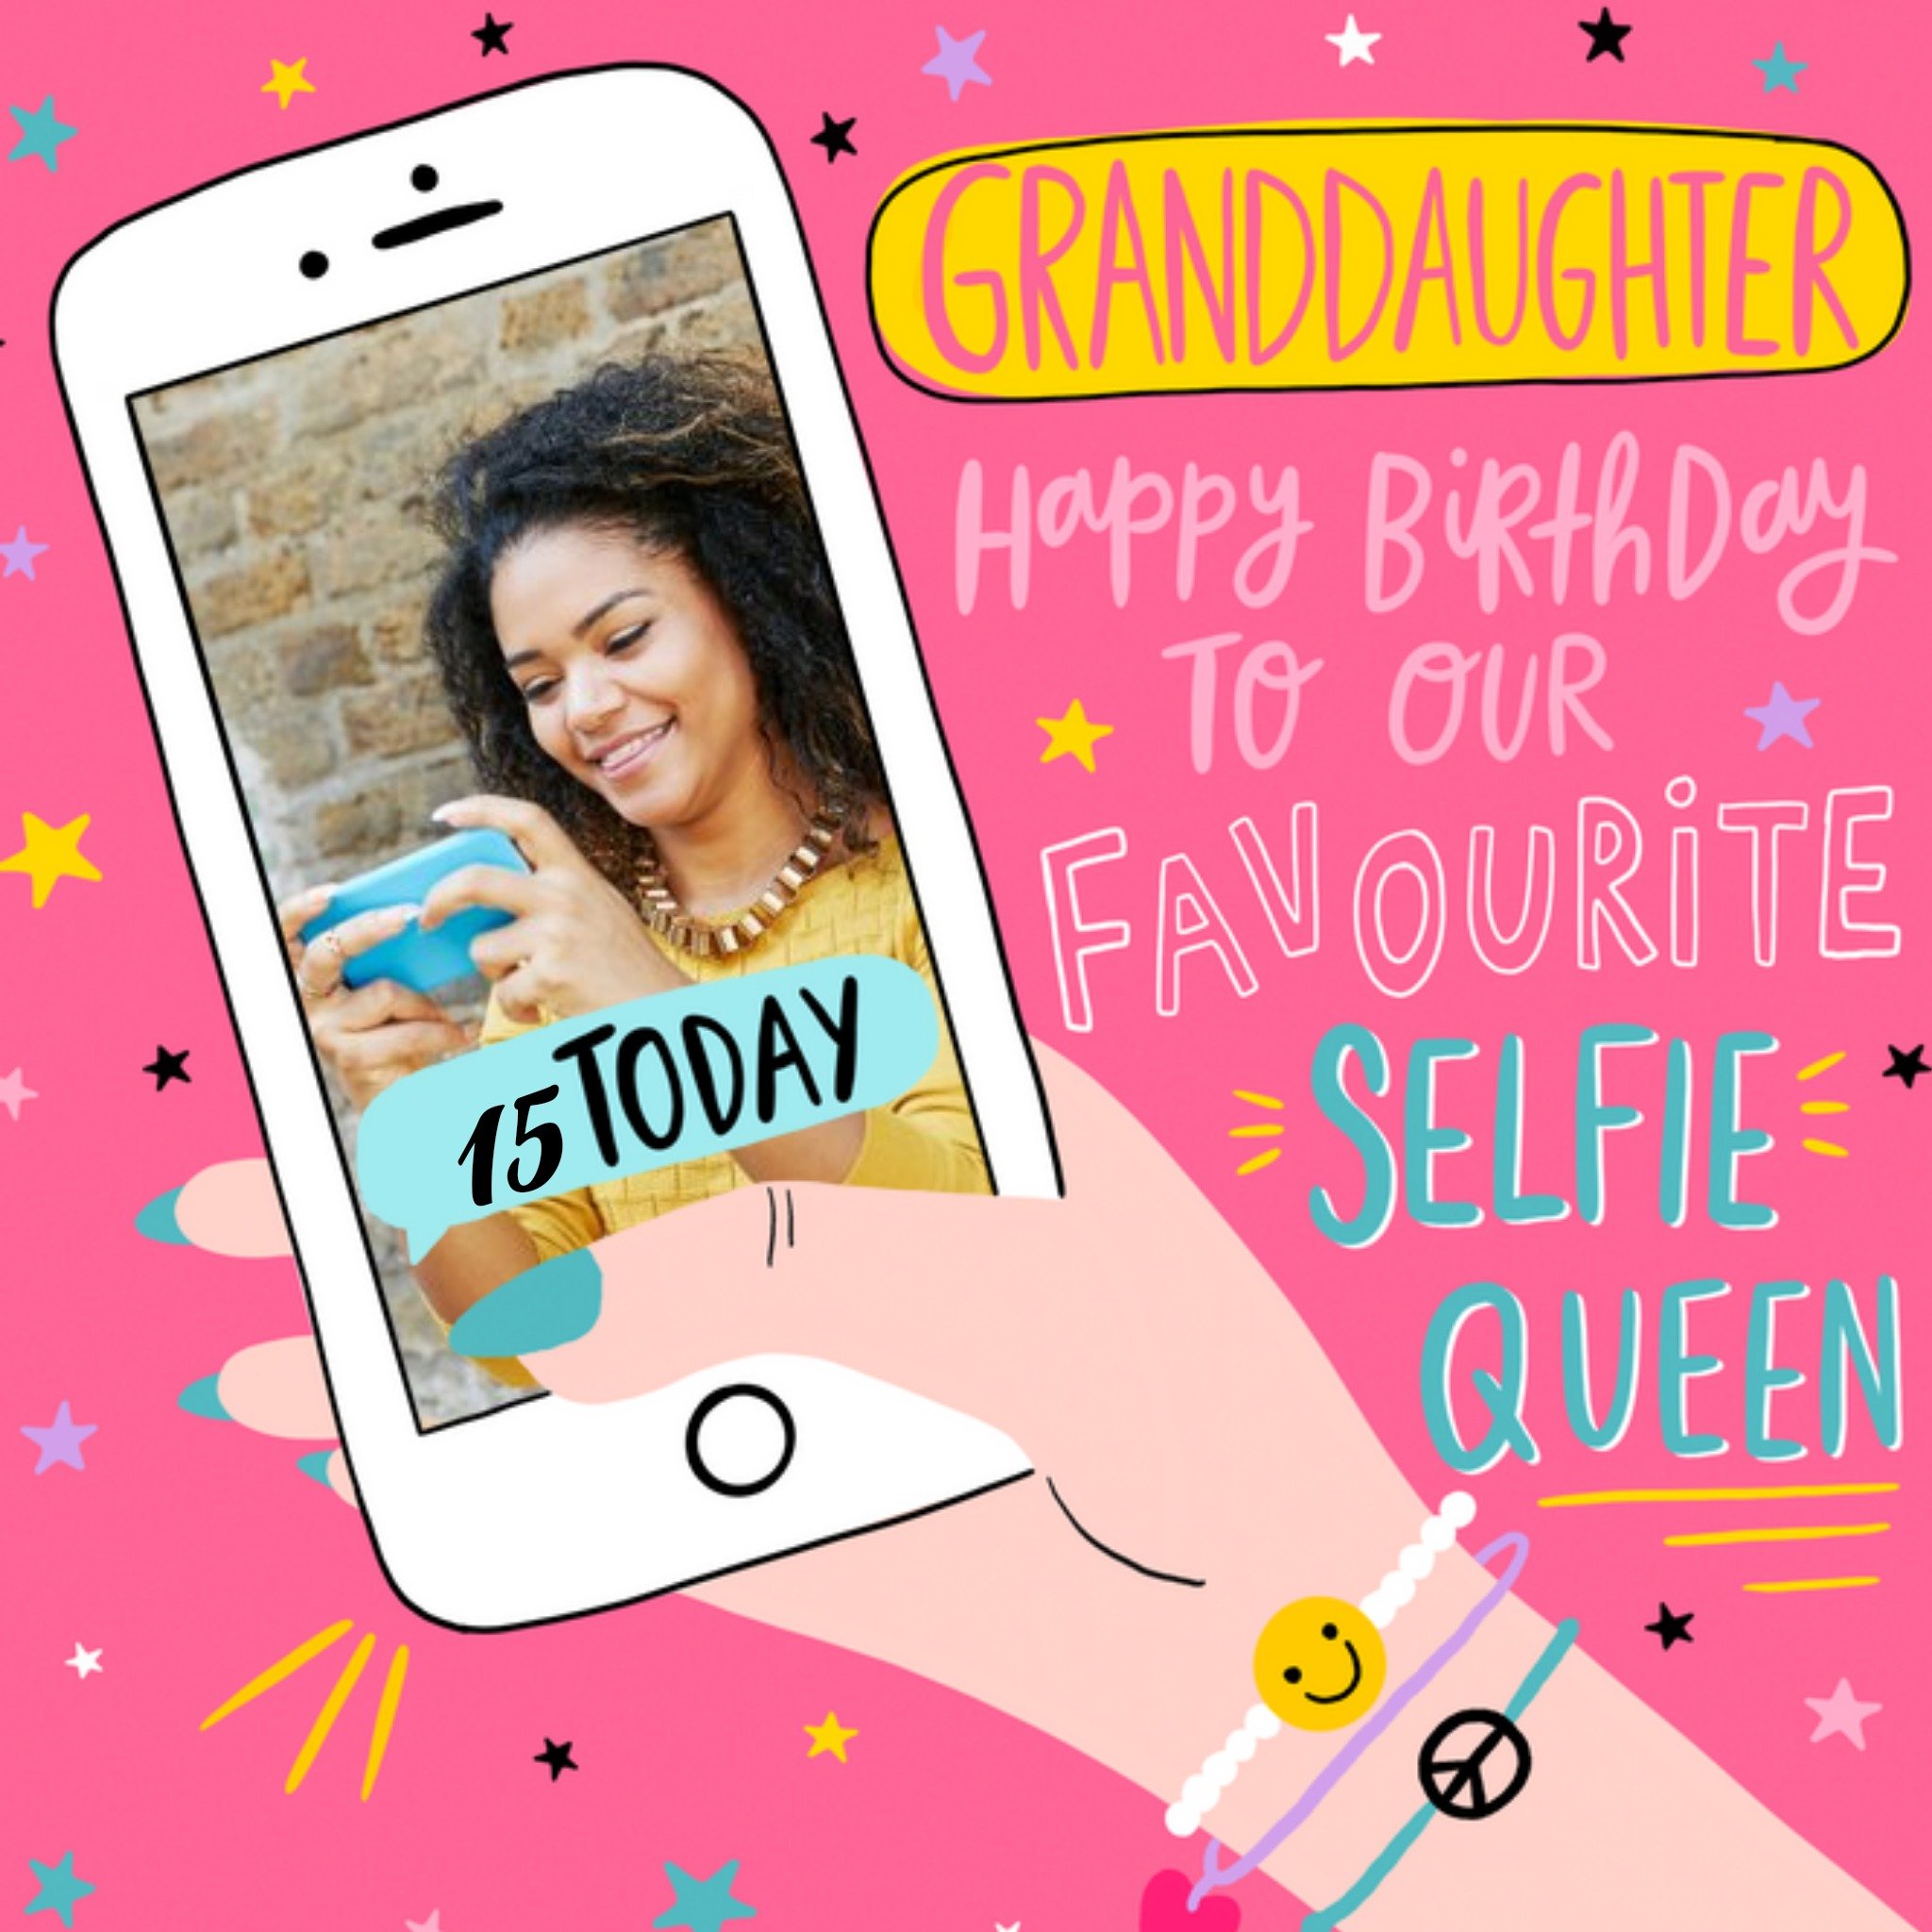 Moonpig Granddaughter Happy Birthday Favourite Selfie Queen Photo Upload Card, Square